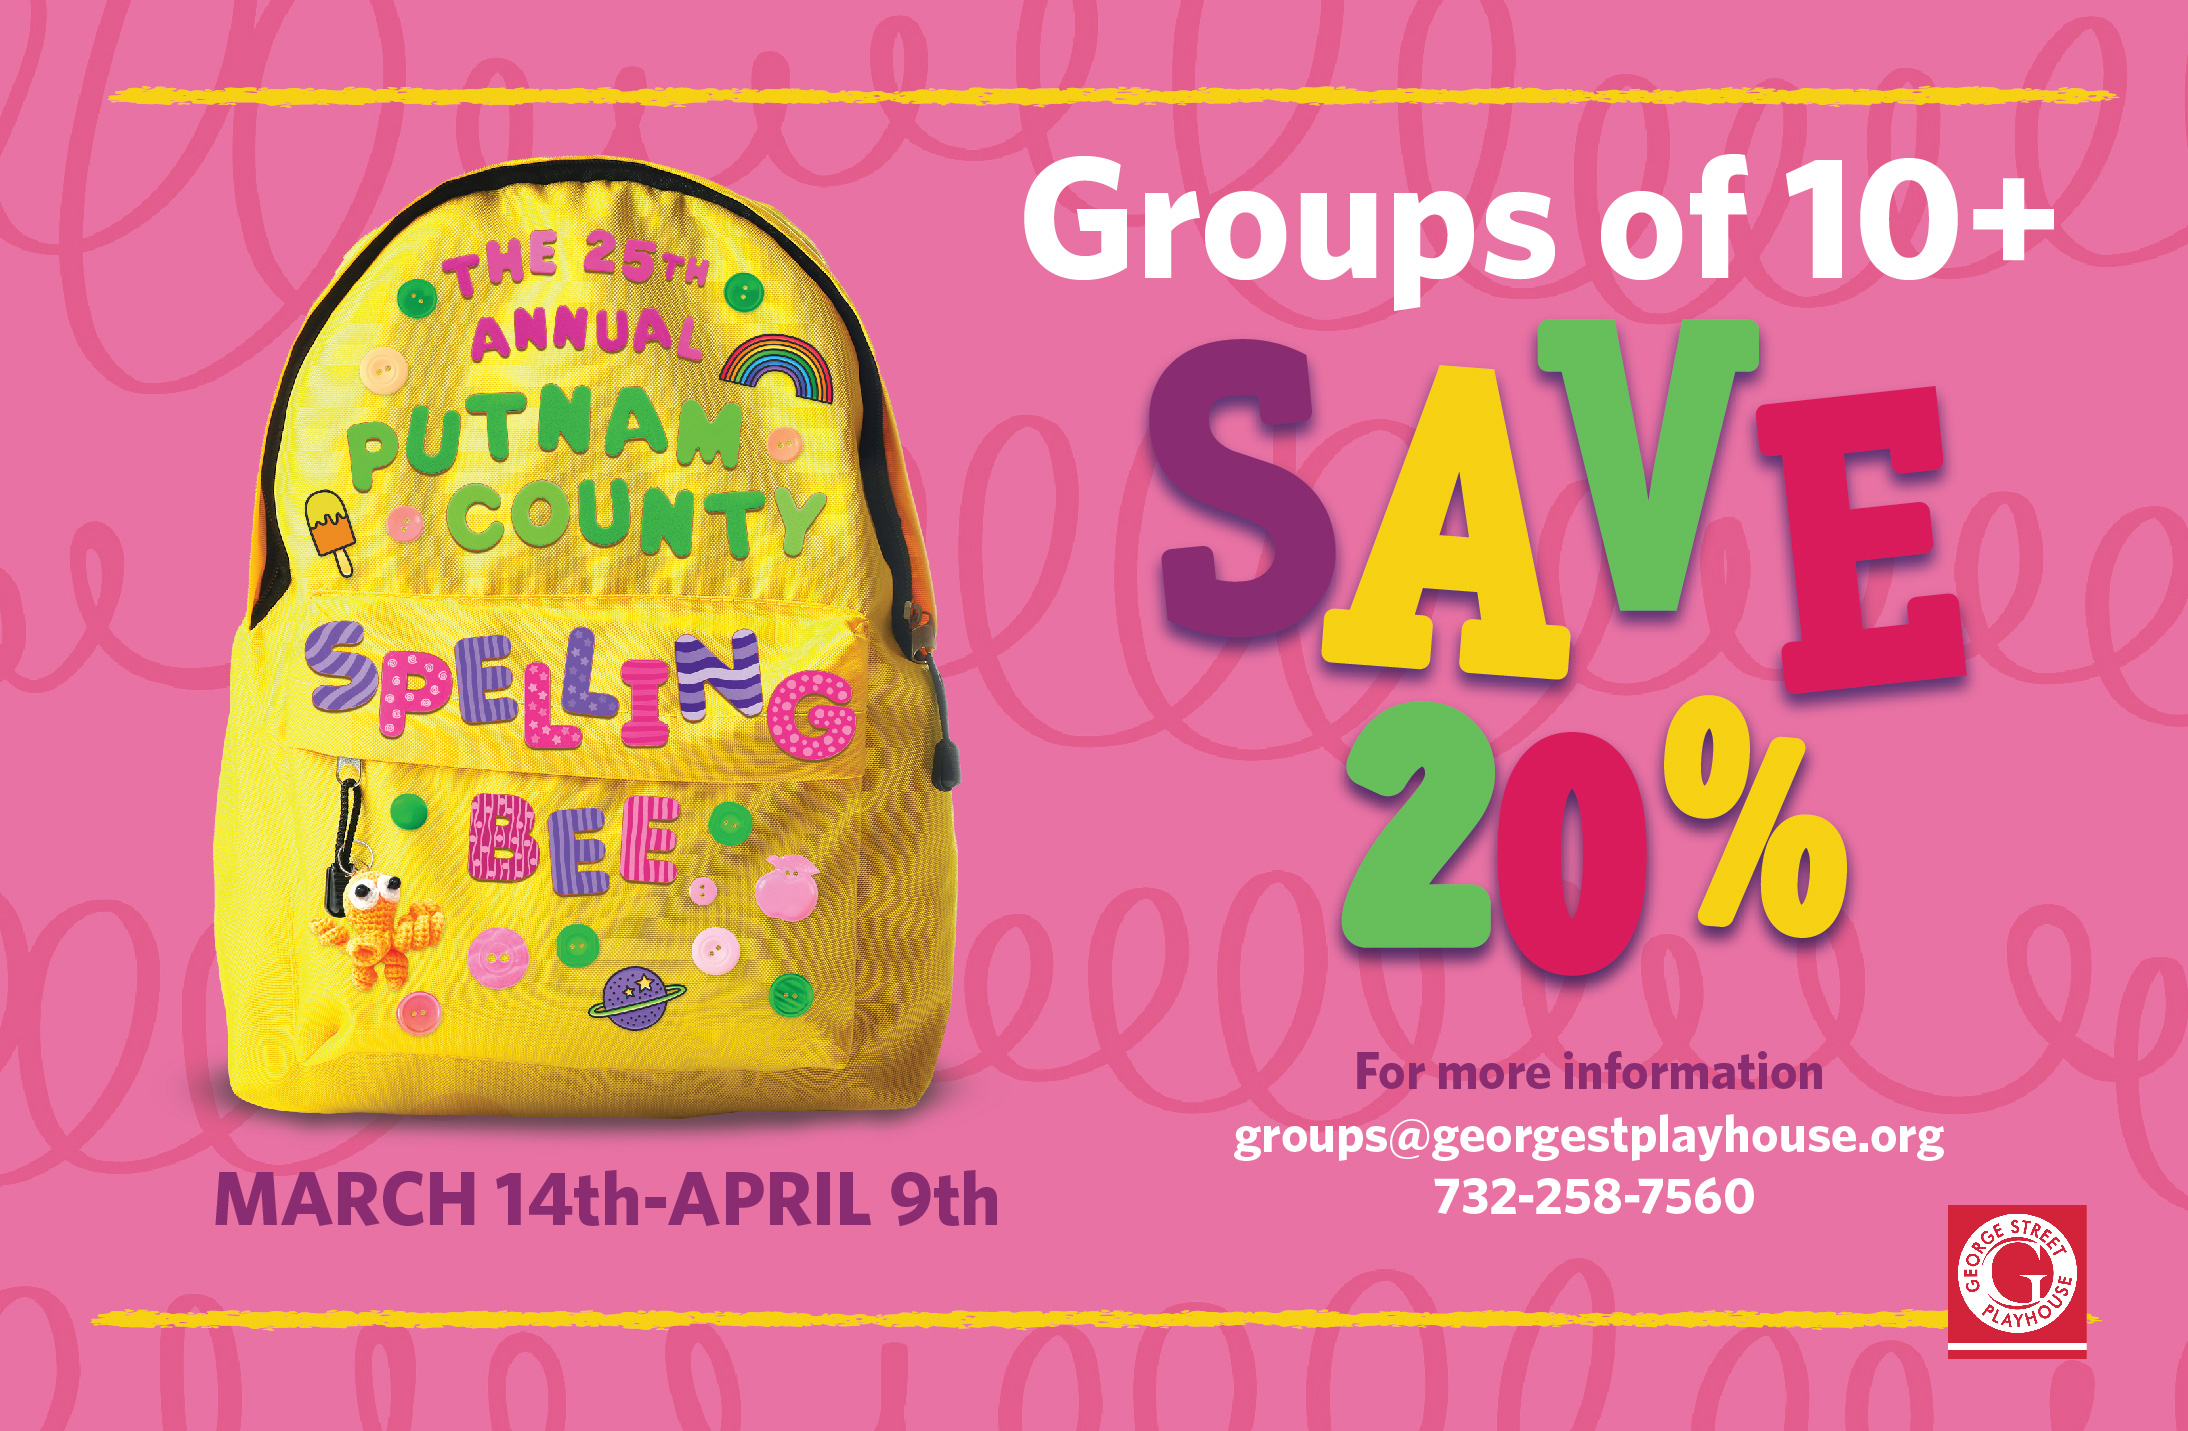 Spelling Groups of 10+ Save 20% 